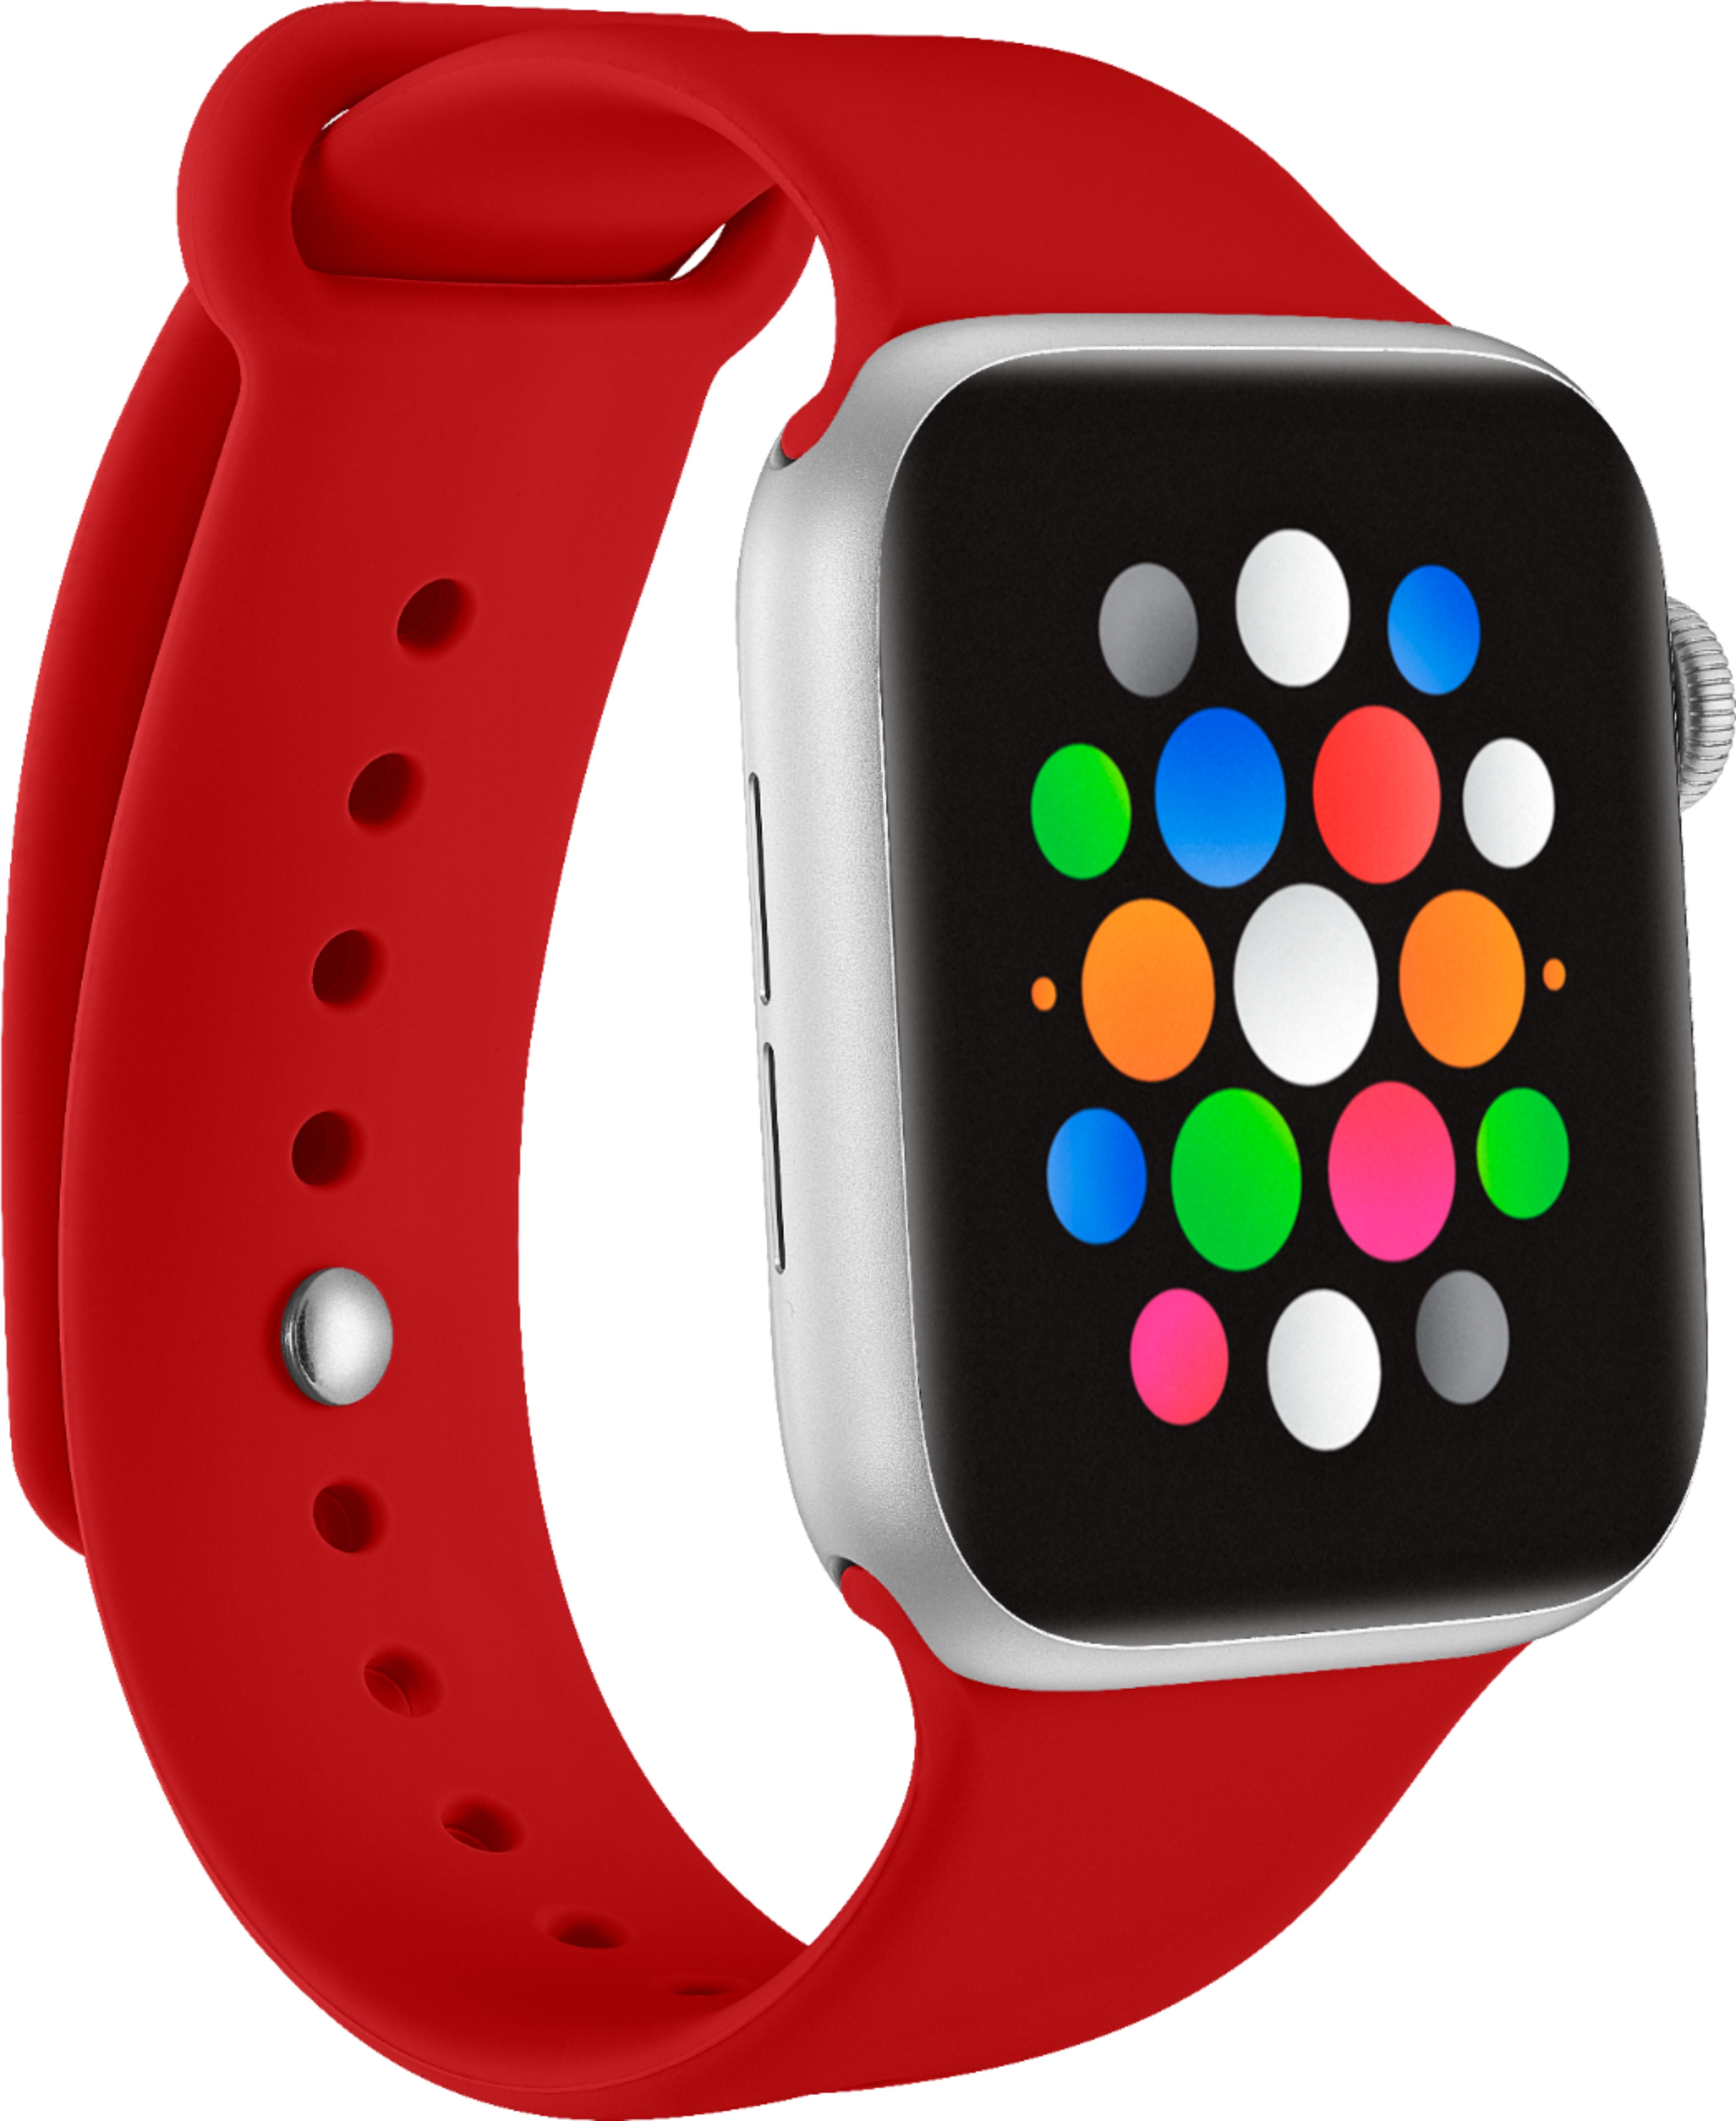 St. Louis Cardinals Logo Silicone Apple Watch Band - Red